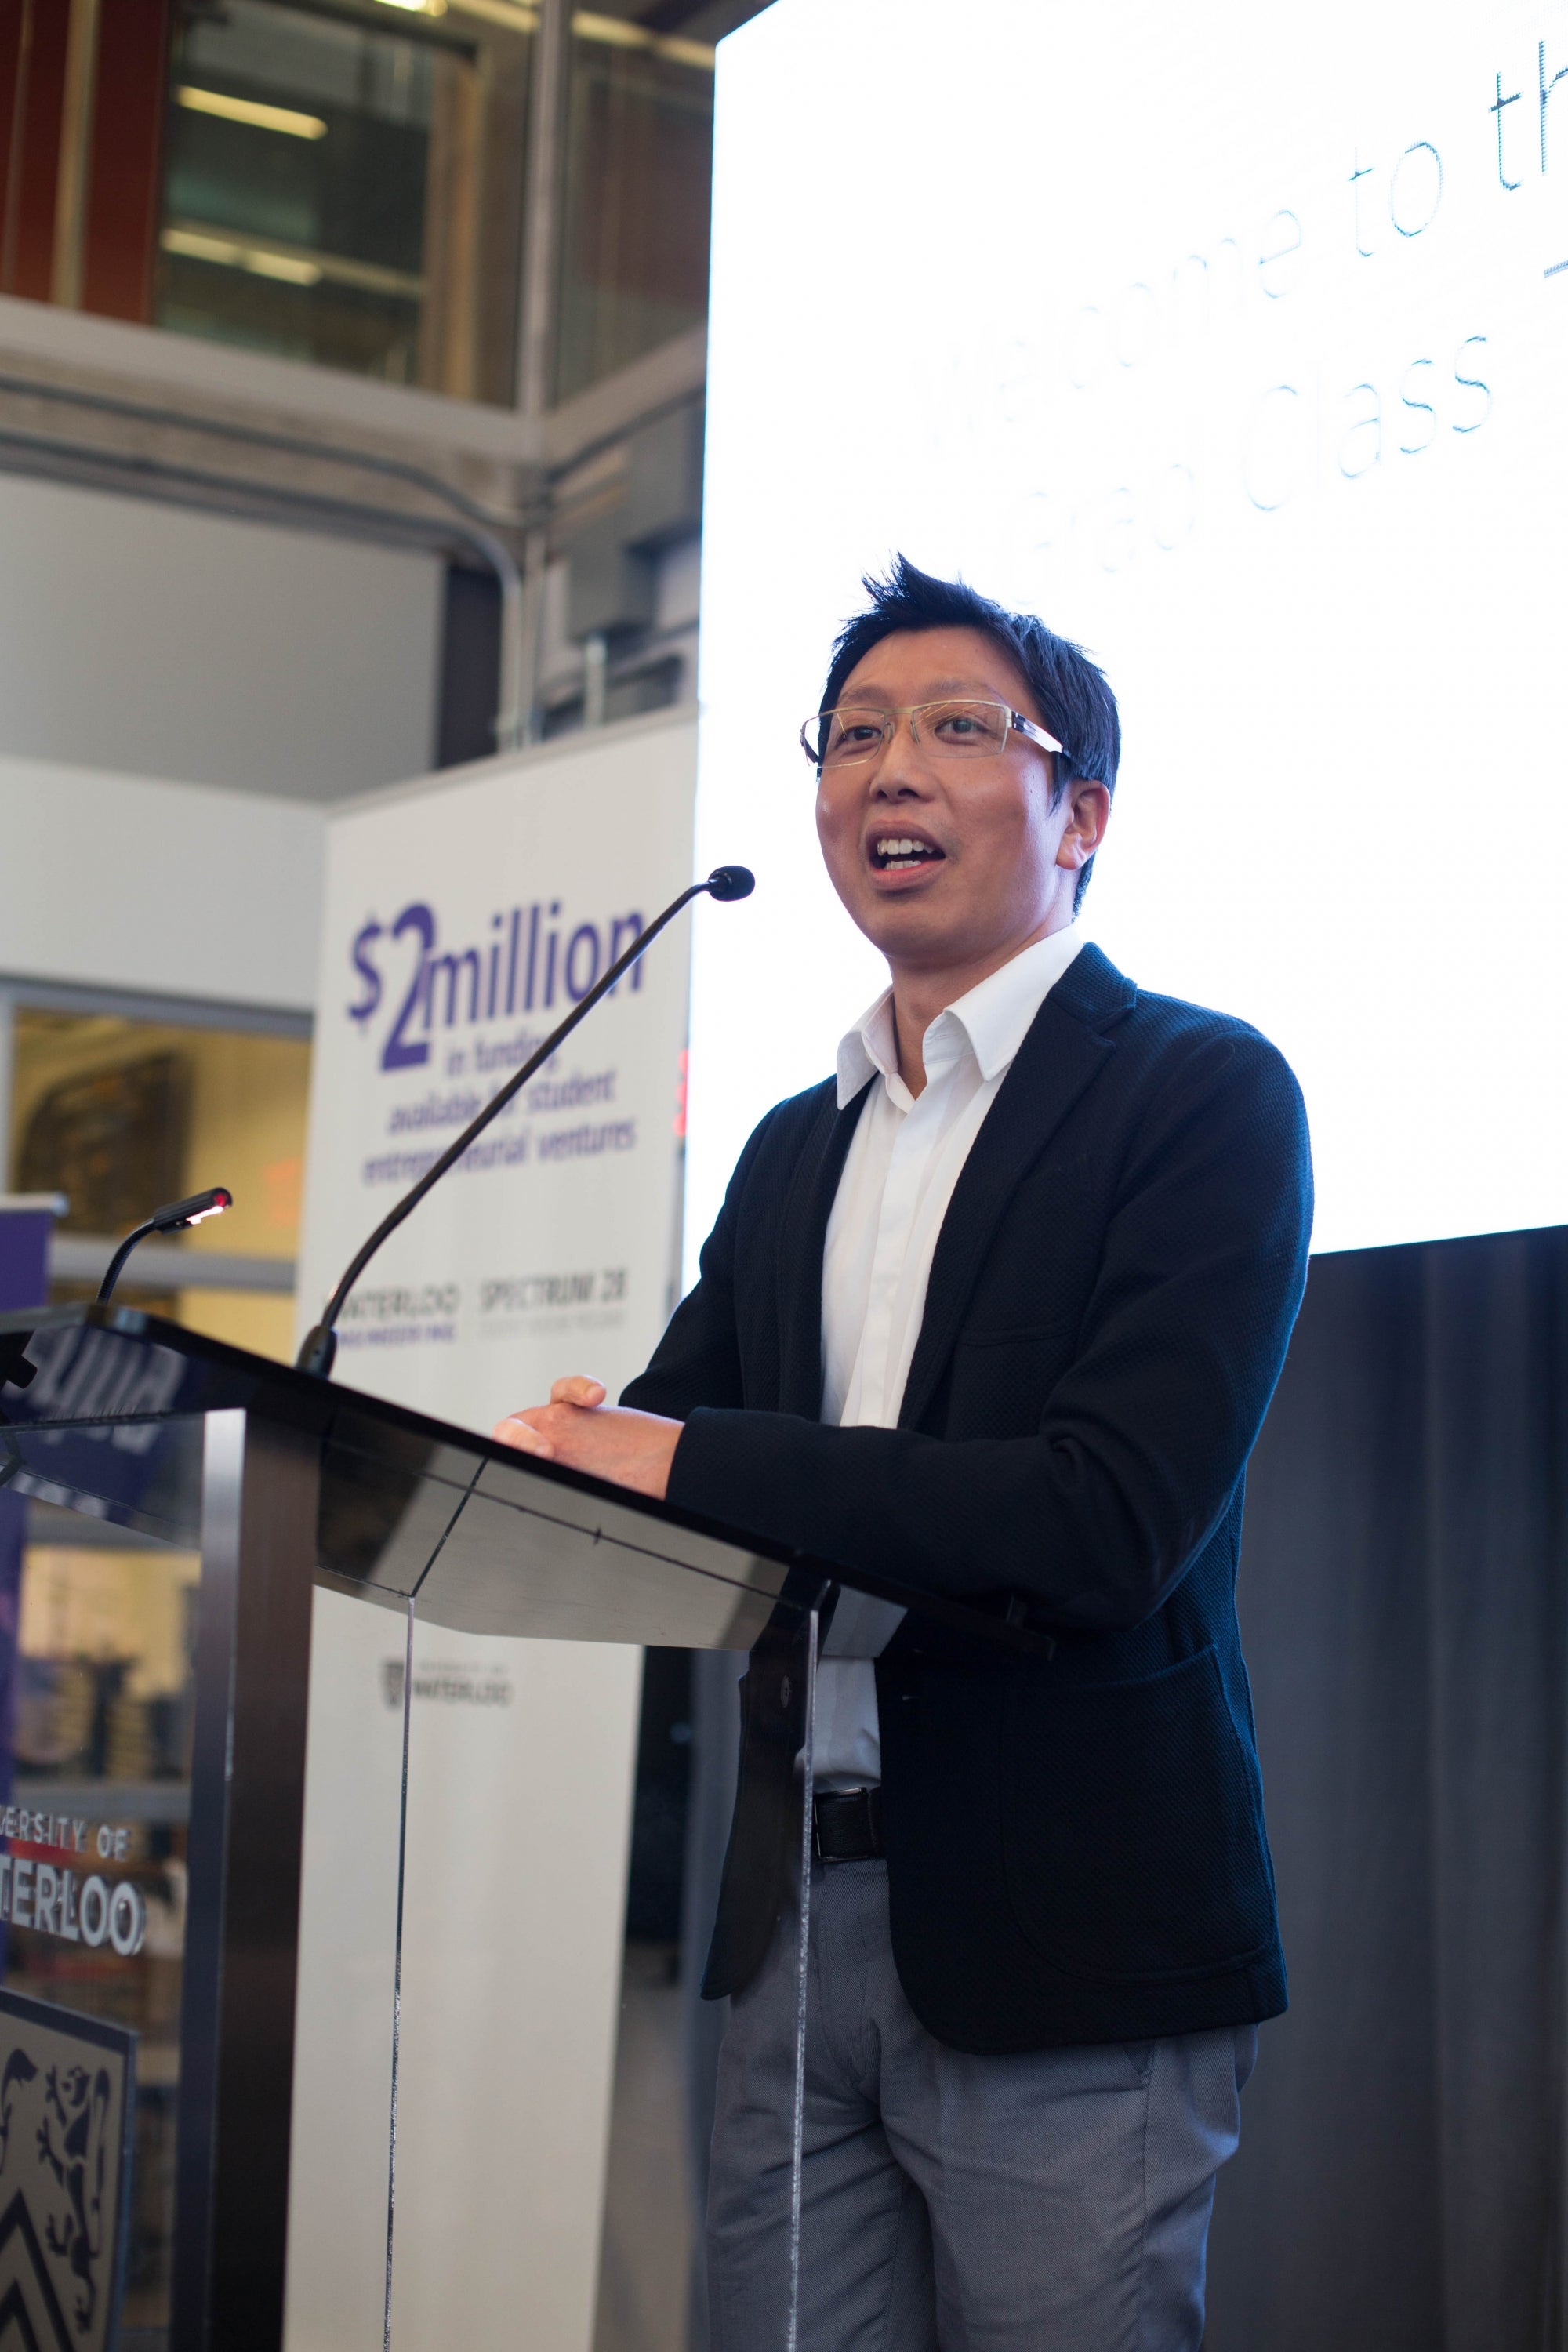 Lyon Wong standing on the podium, speaking at an event